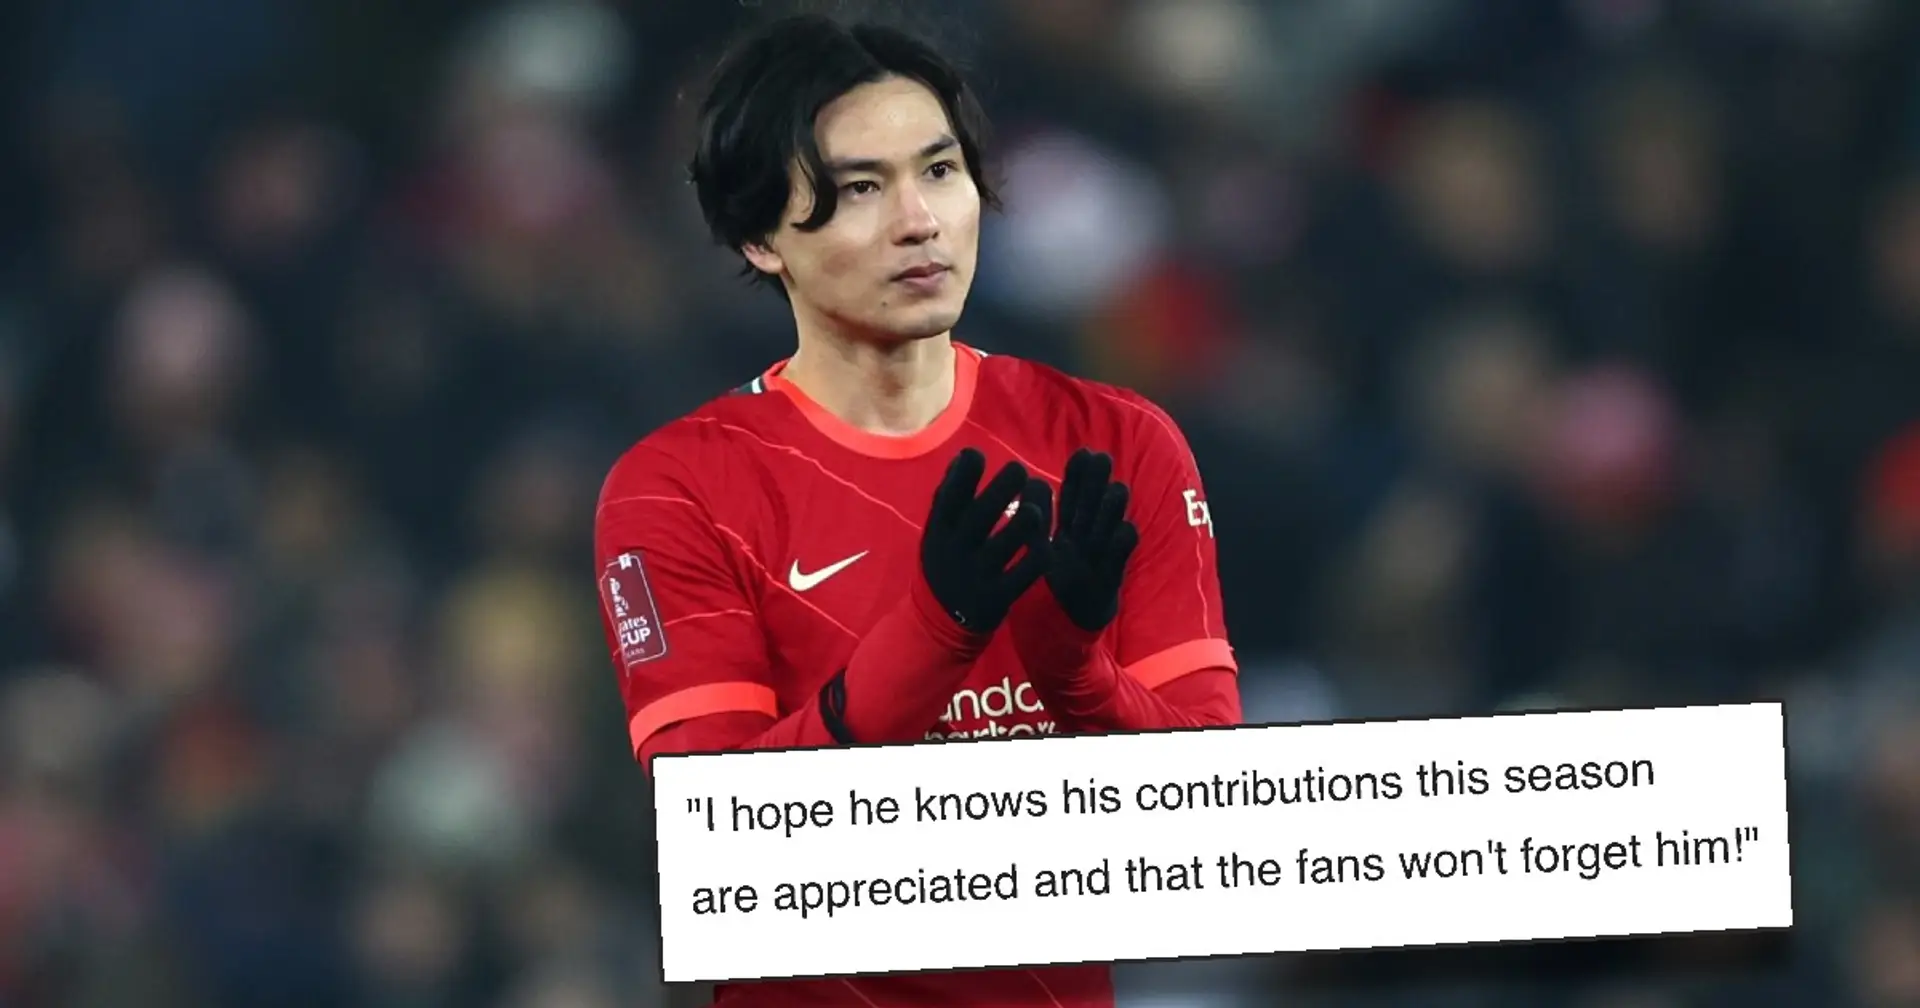 'We’d have 0 trophies this season without him': Fans react to news of Minamino's imminent departure